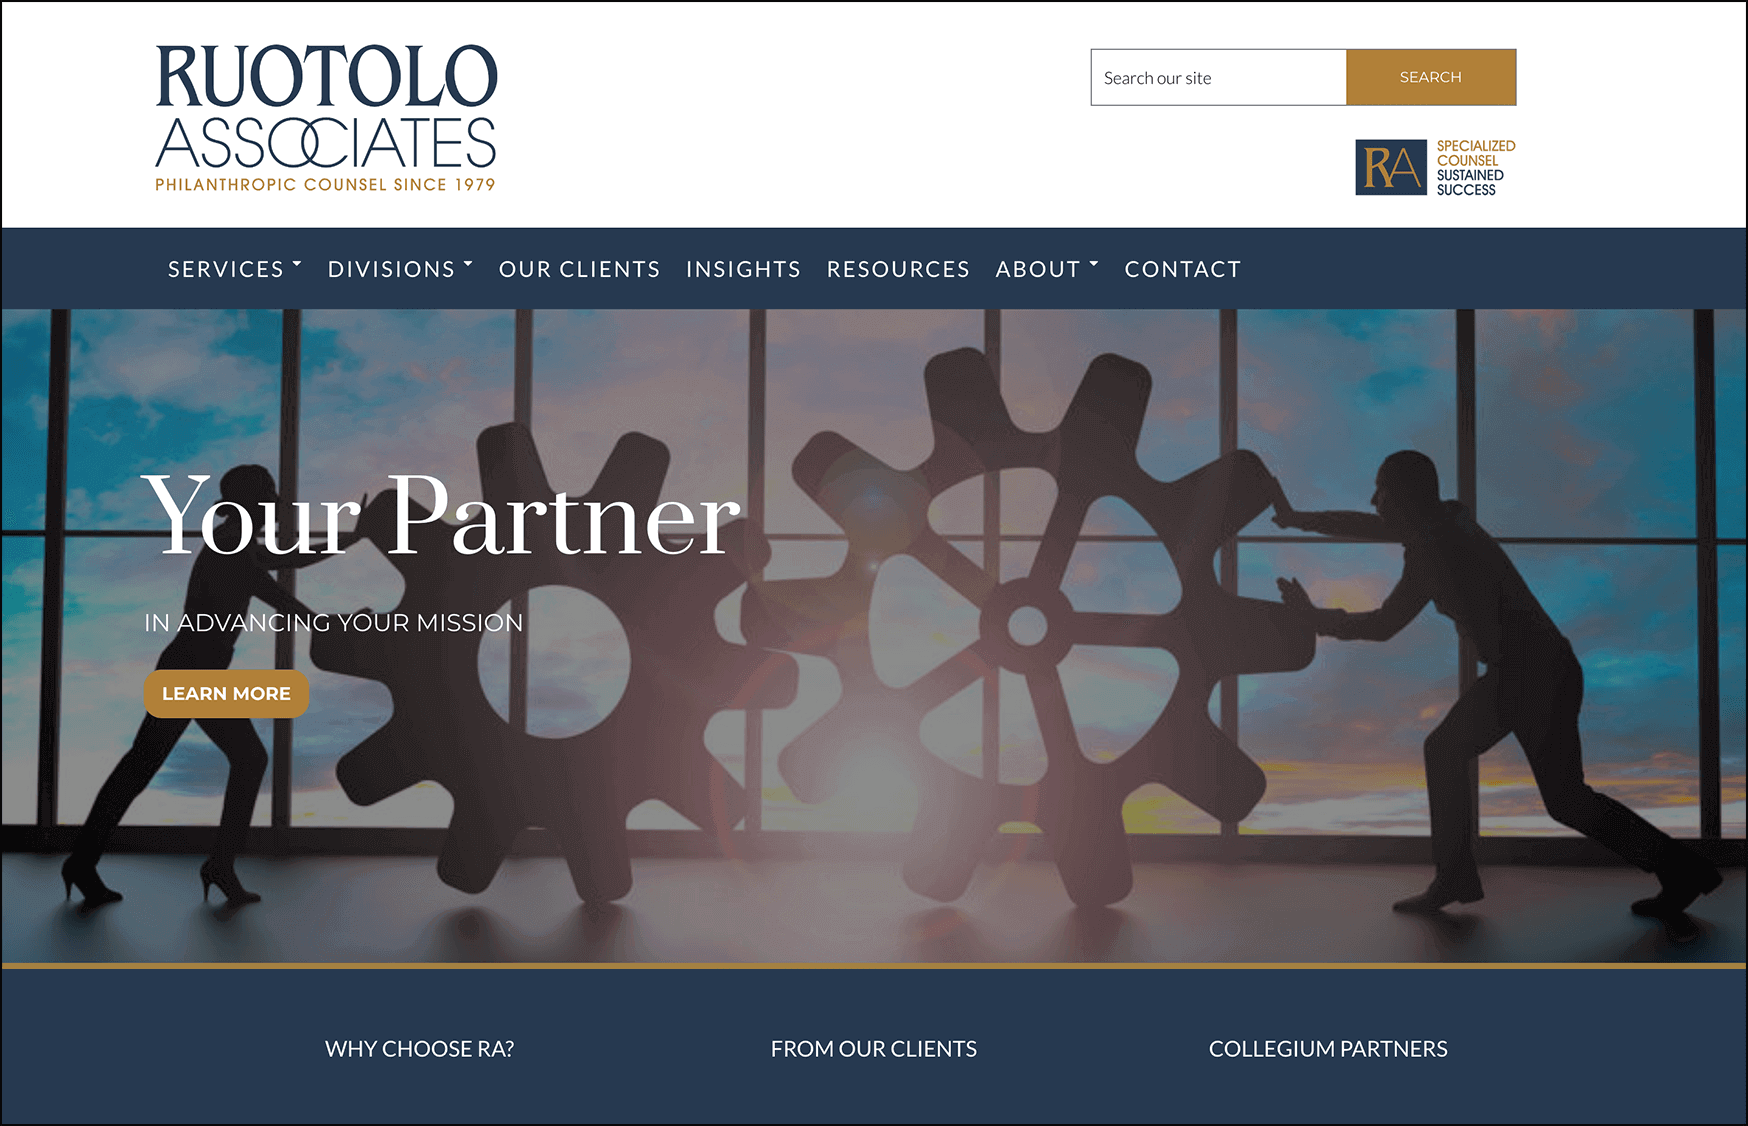 Ruotolo Associates is a top fundraising consulting firm.